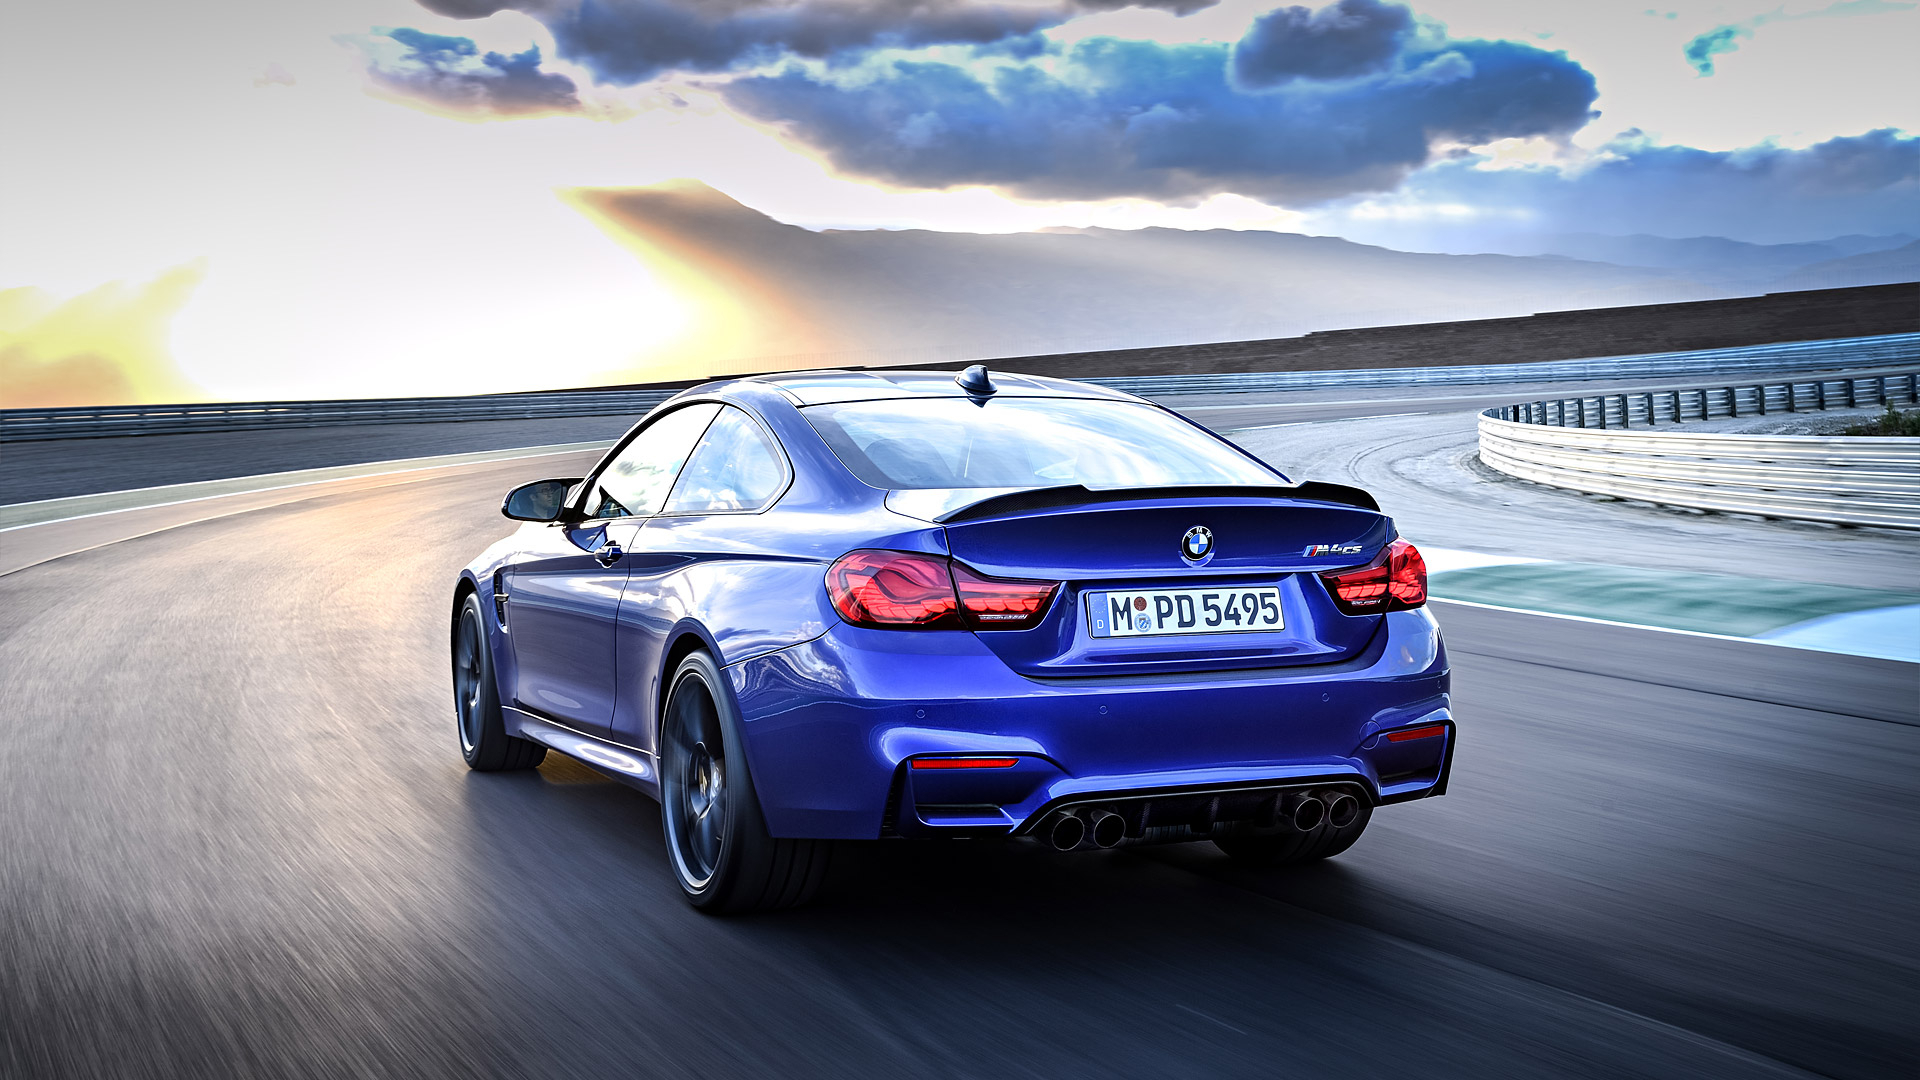 Bmw M4 Cs Wallpaper For iPhone Wantingseed